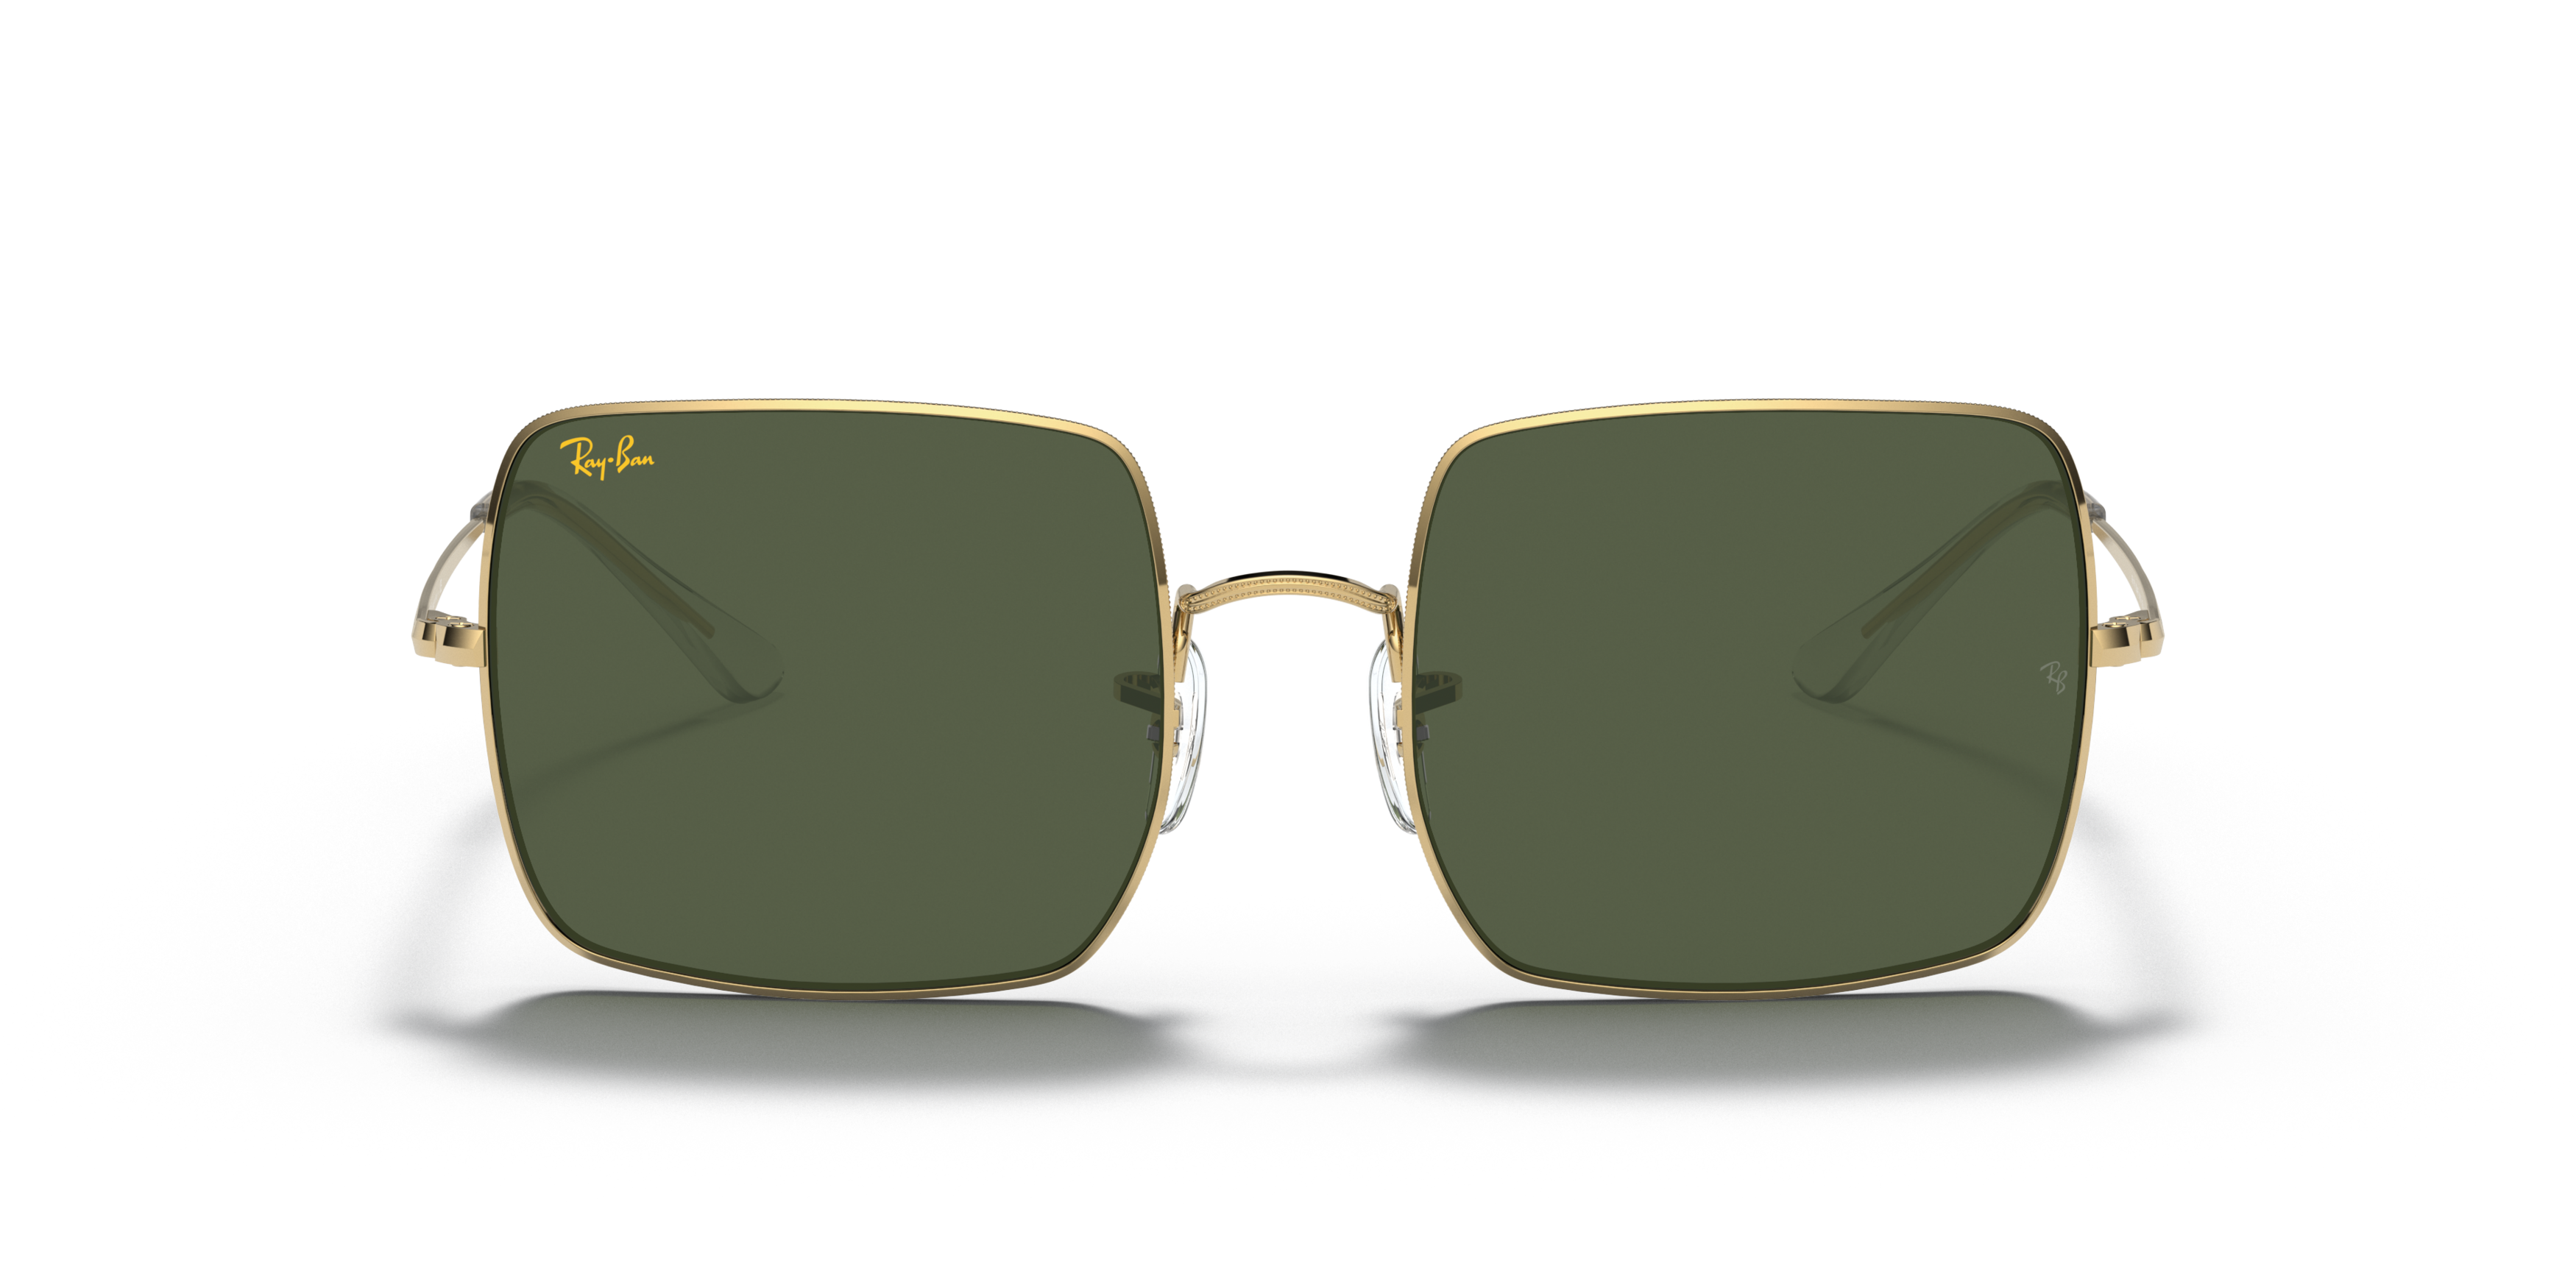 [products.image.front] Ray-Ban Square 1971 Legend Gold RB1971 919631